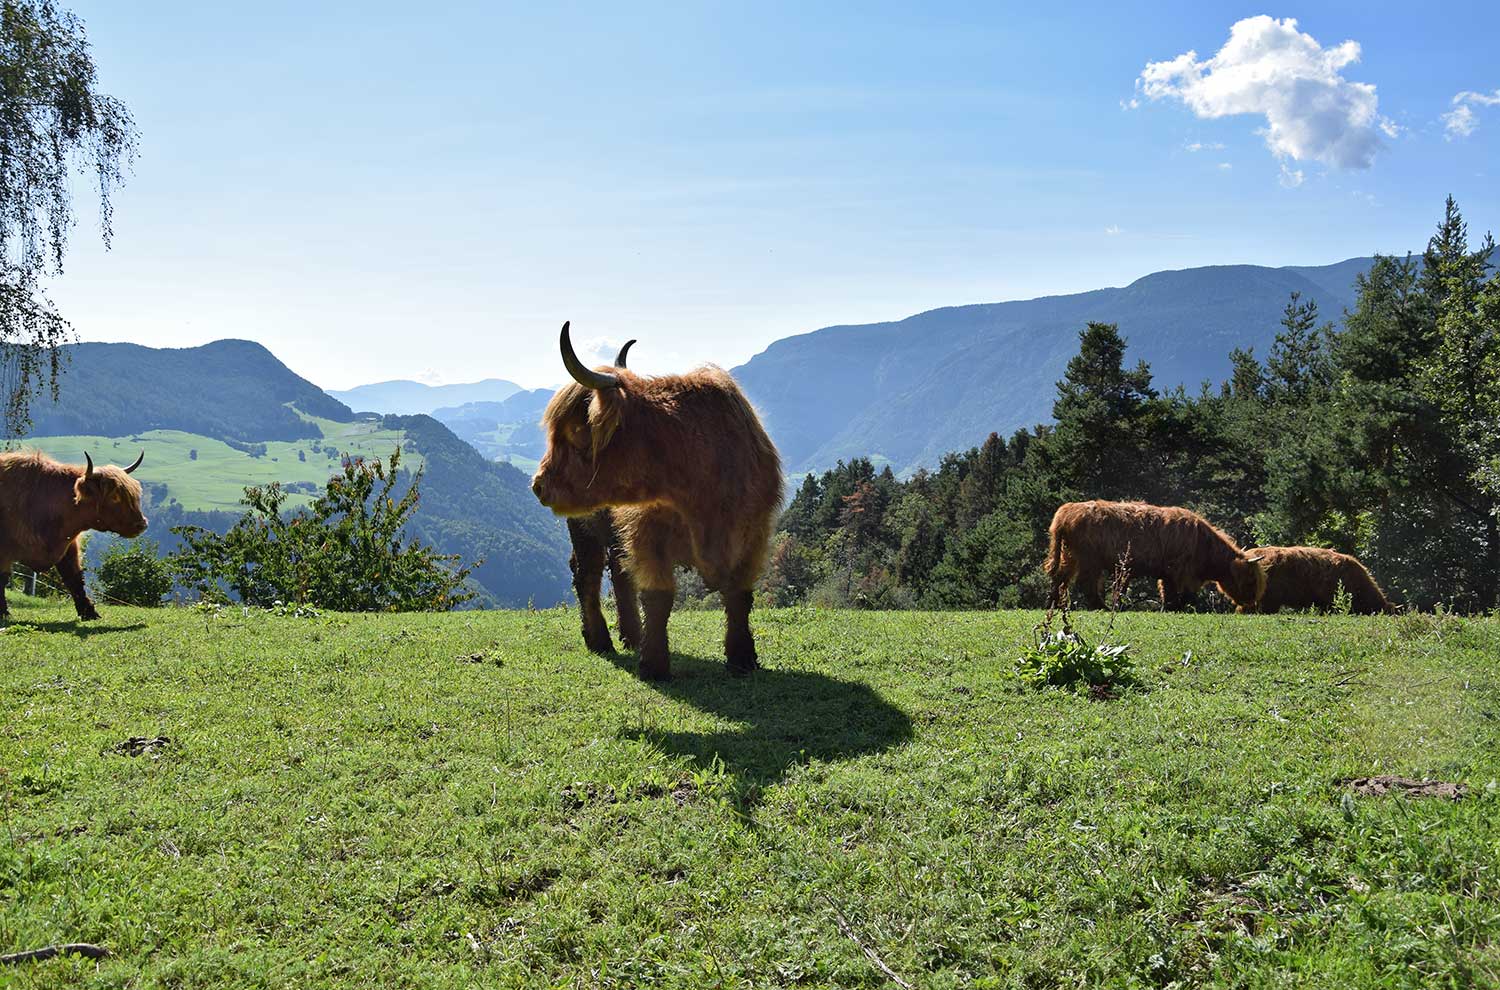 Our scottish Highland cattle